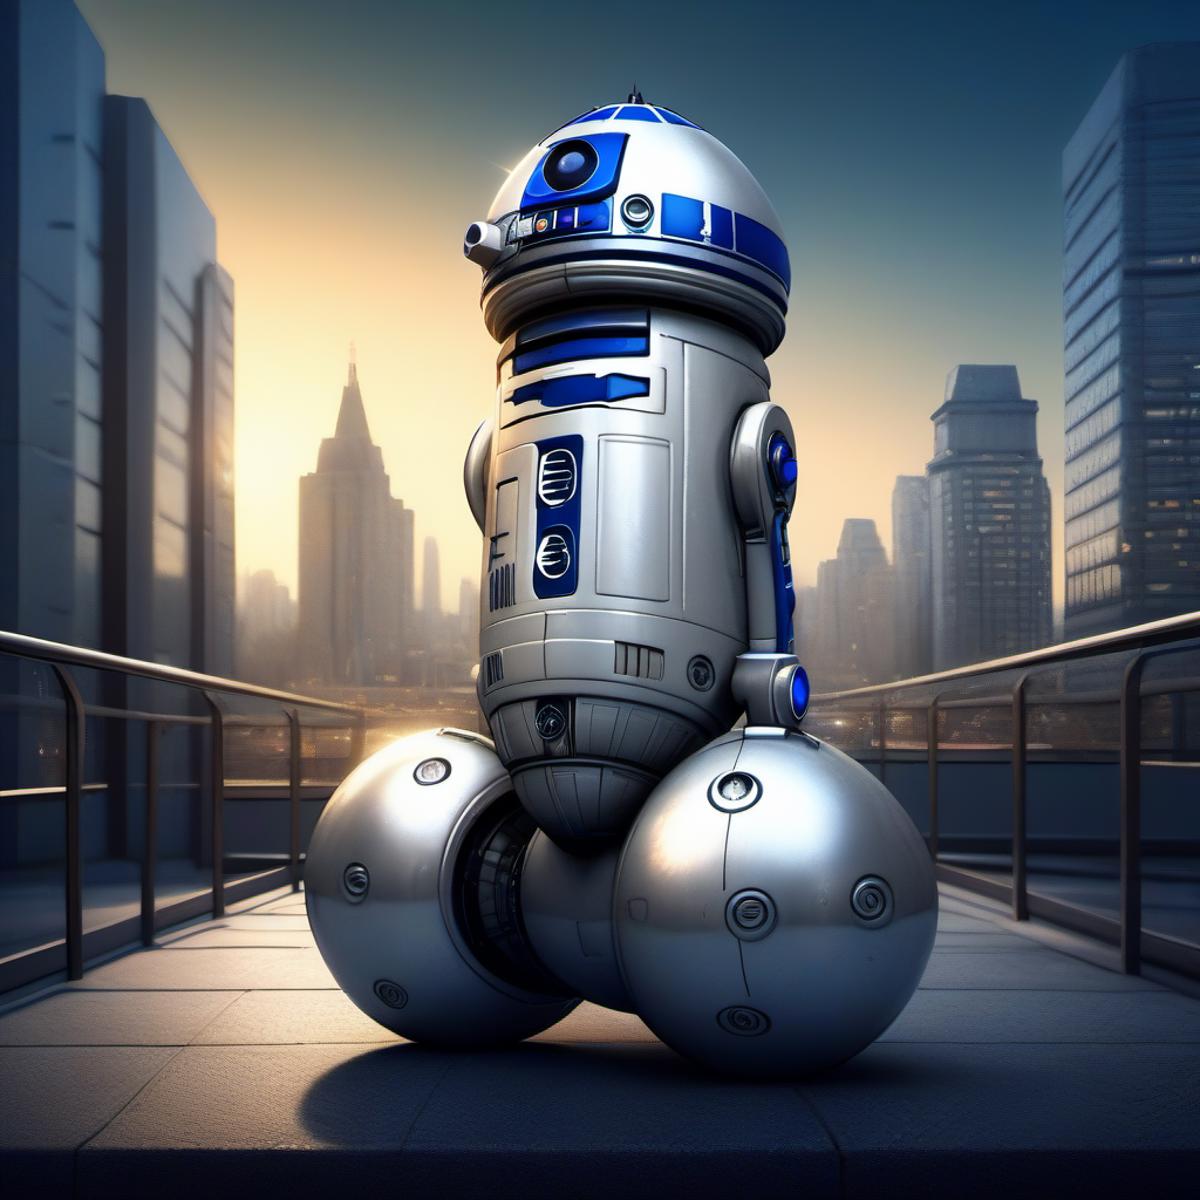 A blue and white robotic droid is sitting in front of a city skyline.